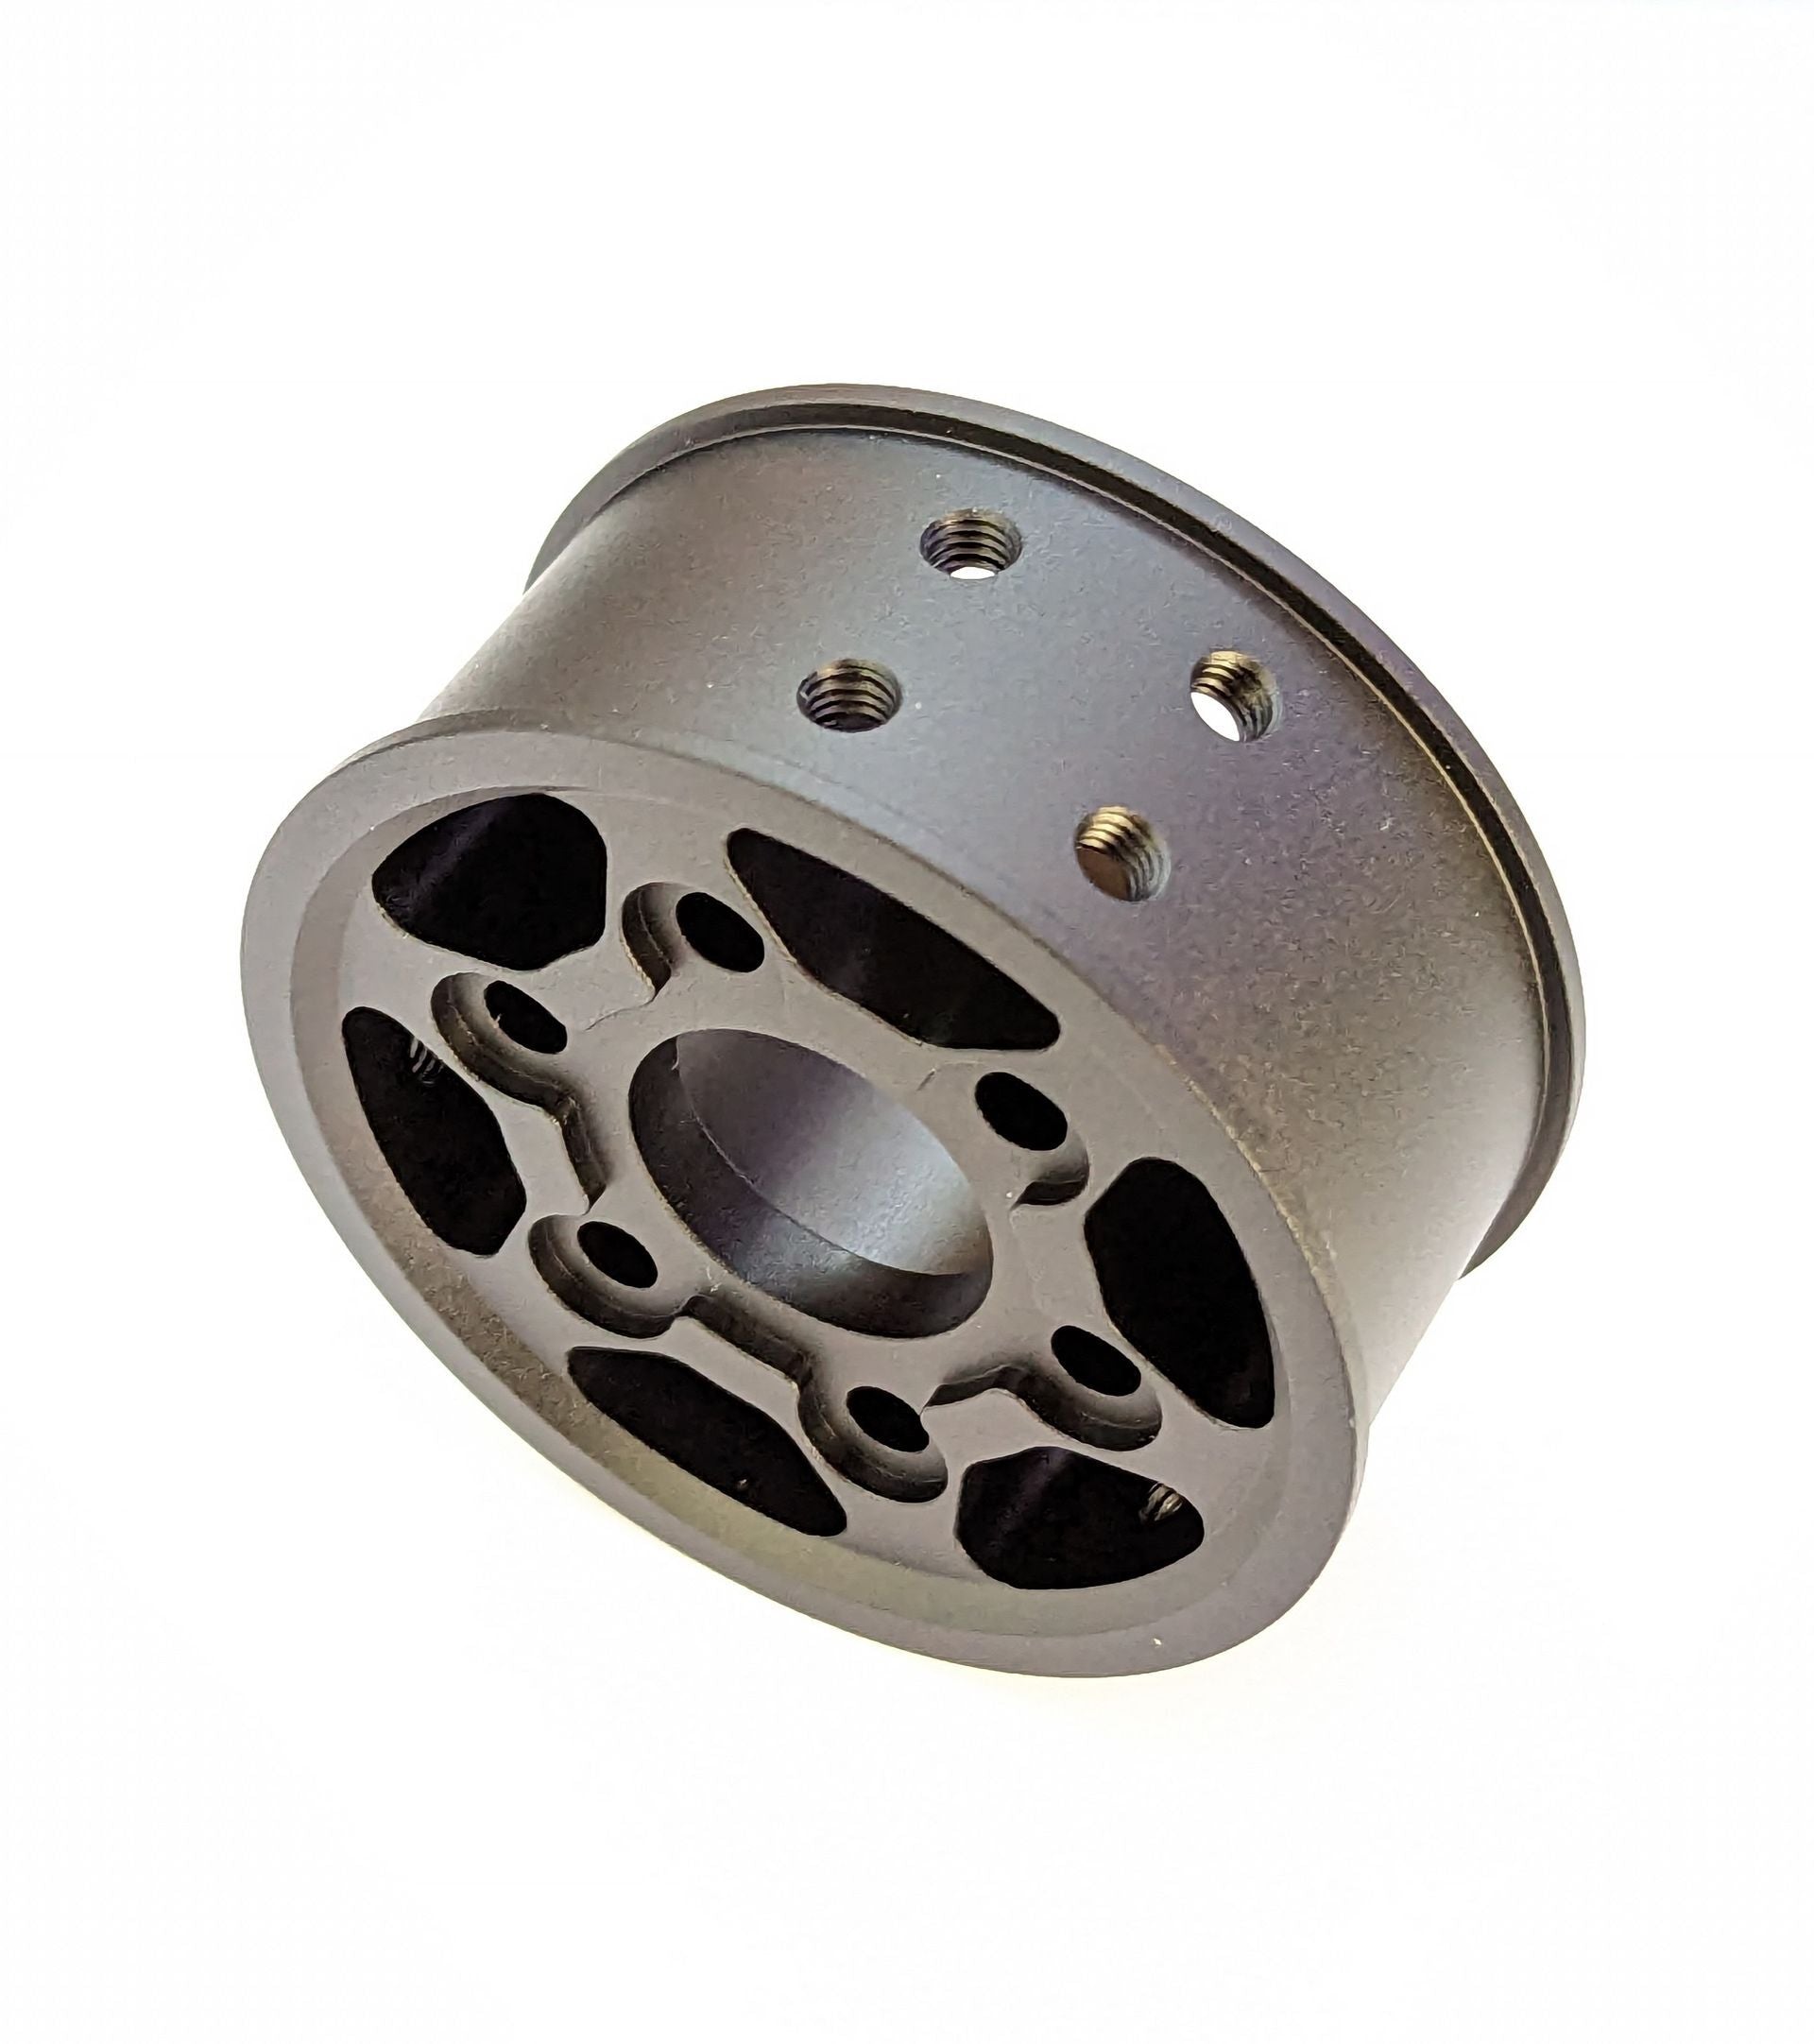 3" Swerve Aluminum Billet Wheel for MAXSwerve